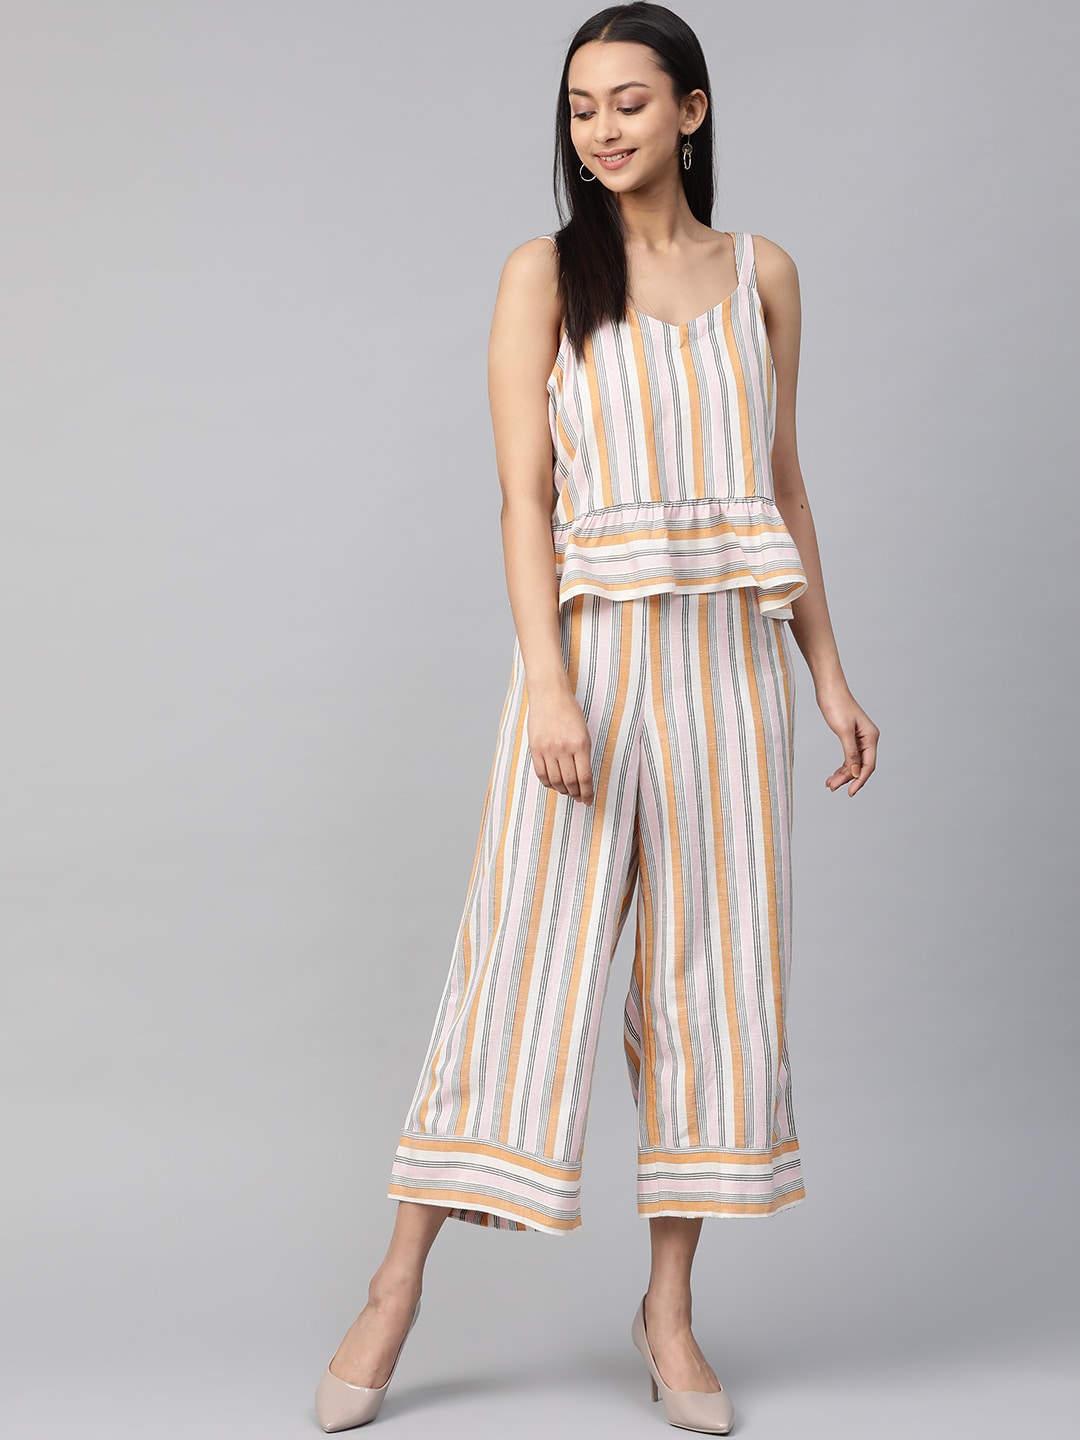 Global Desi Women Off-White & Mustard Yellow Striped Top with Palazzos Price in India